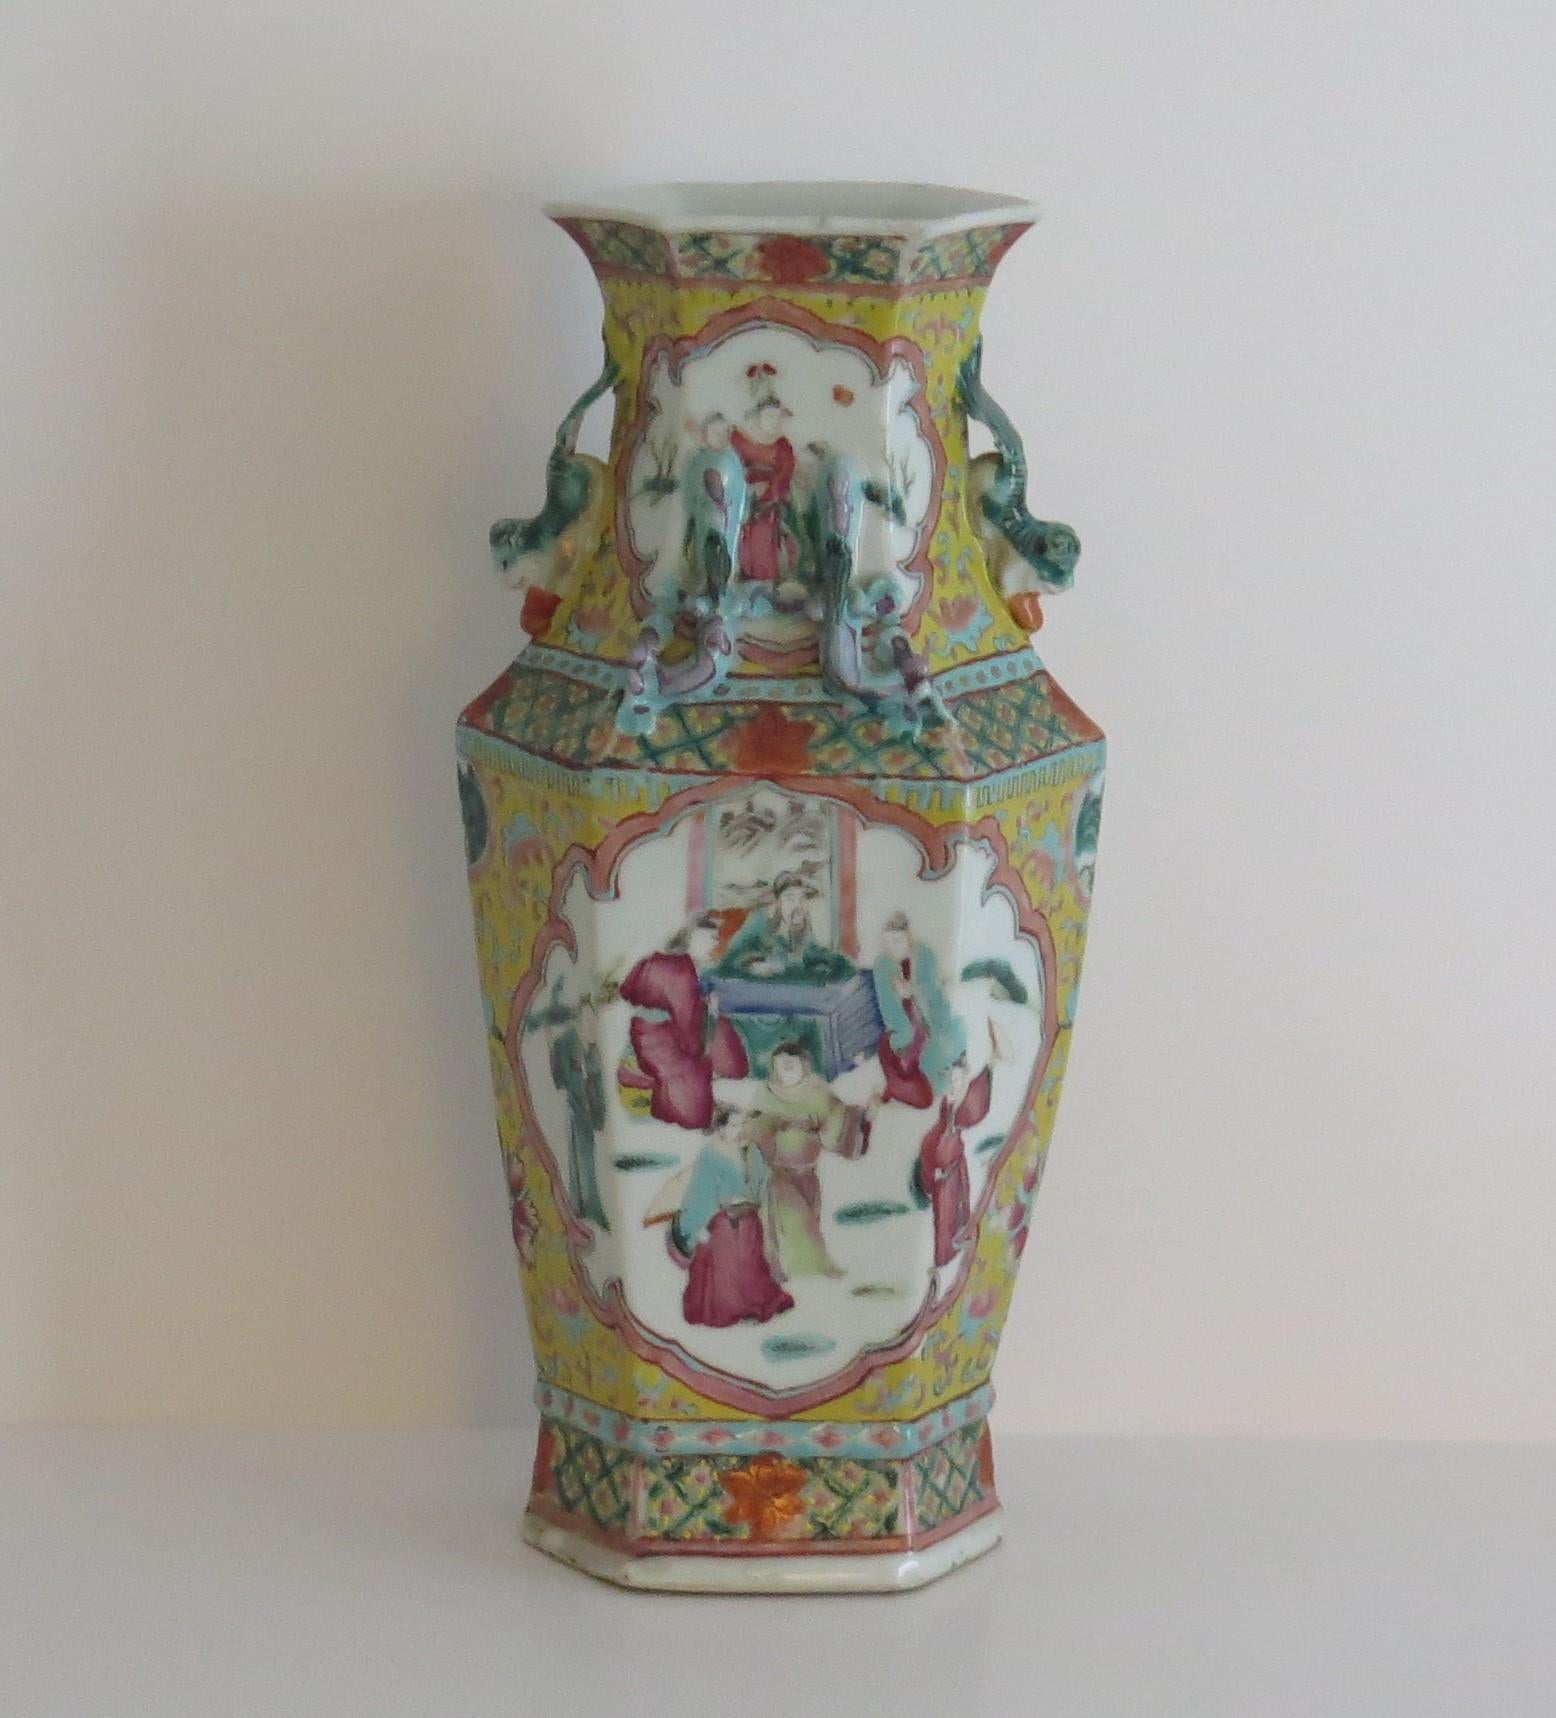 This is a good quality, highly decorative Chinese export, Famille Rose porcelain Vase, which we date to the late 19th Century to early 20th Century, 1890 to 1920, Late Qing to early Republic period.

The vase has a tapering hexagonal shape with an